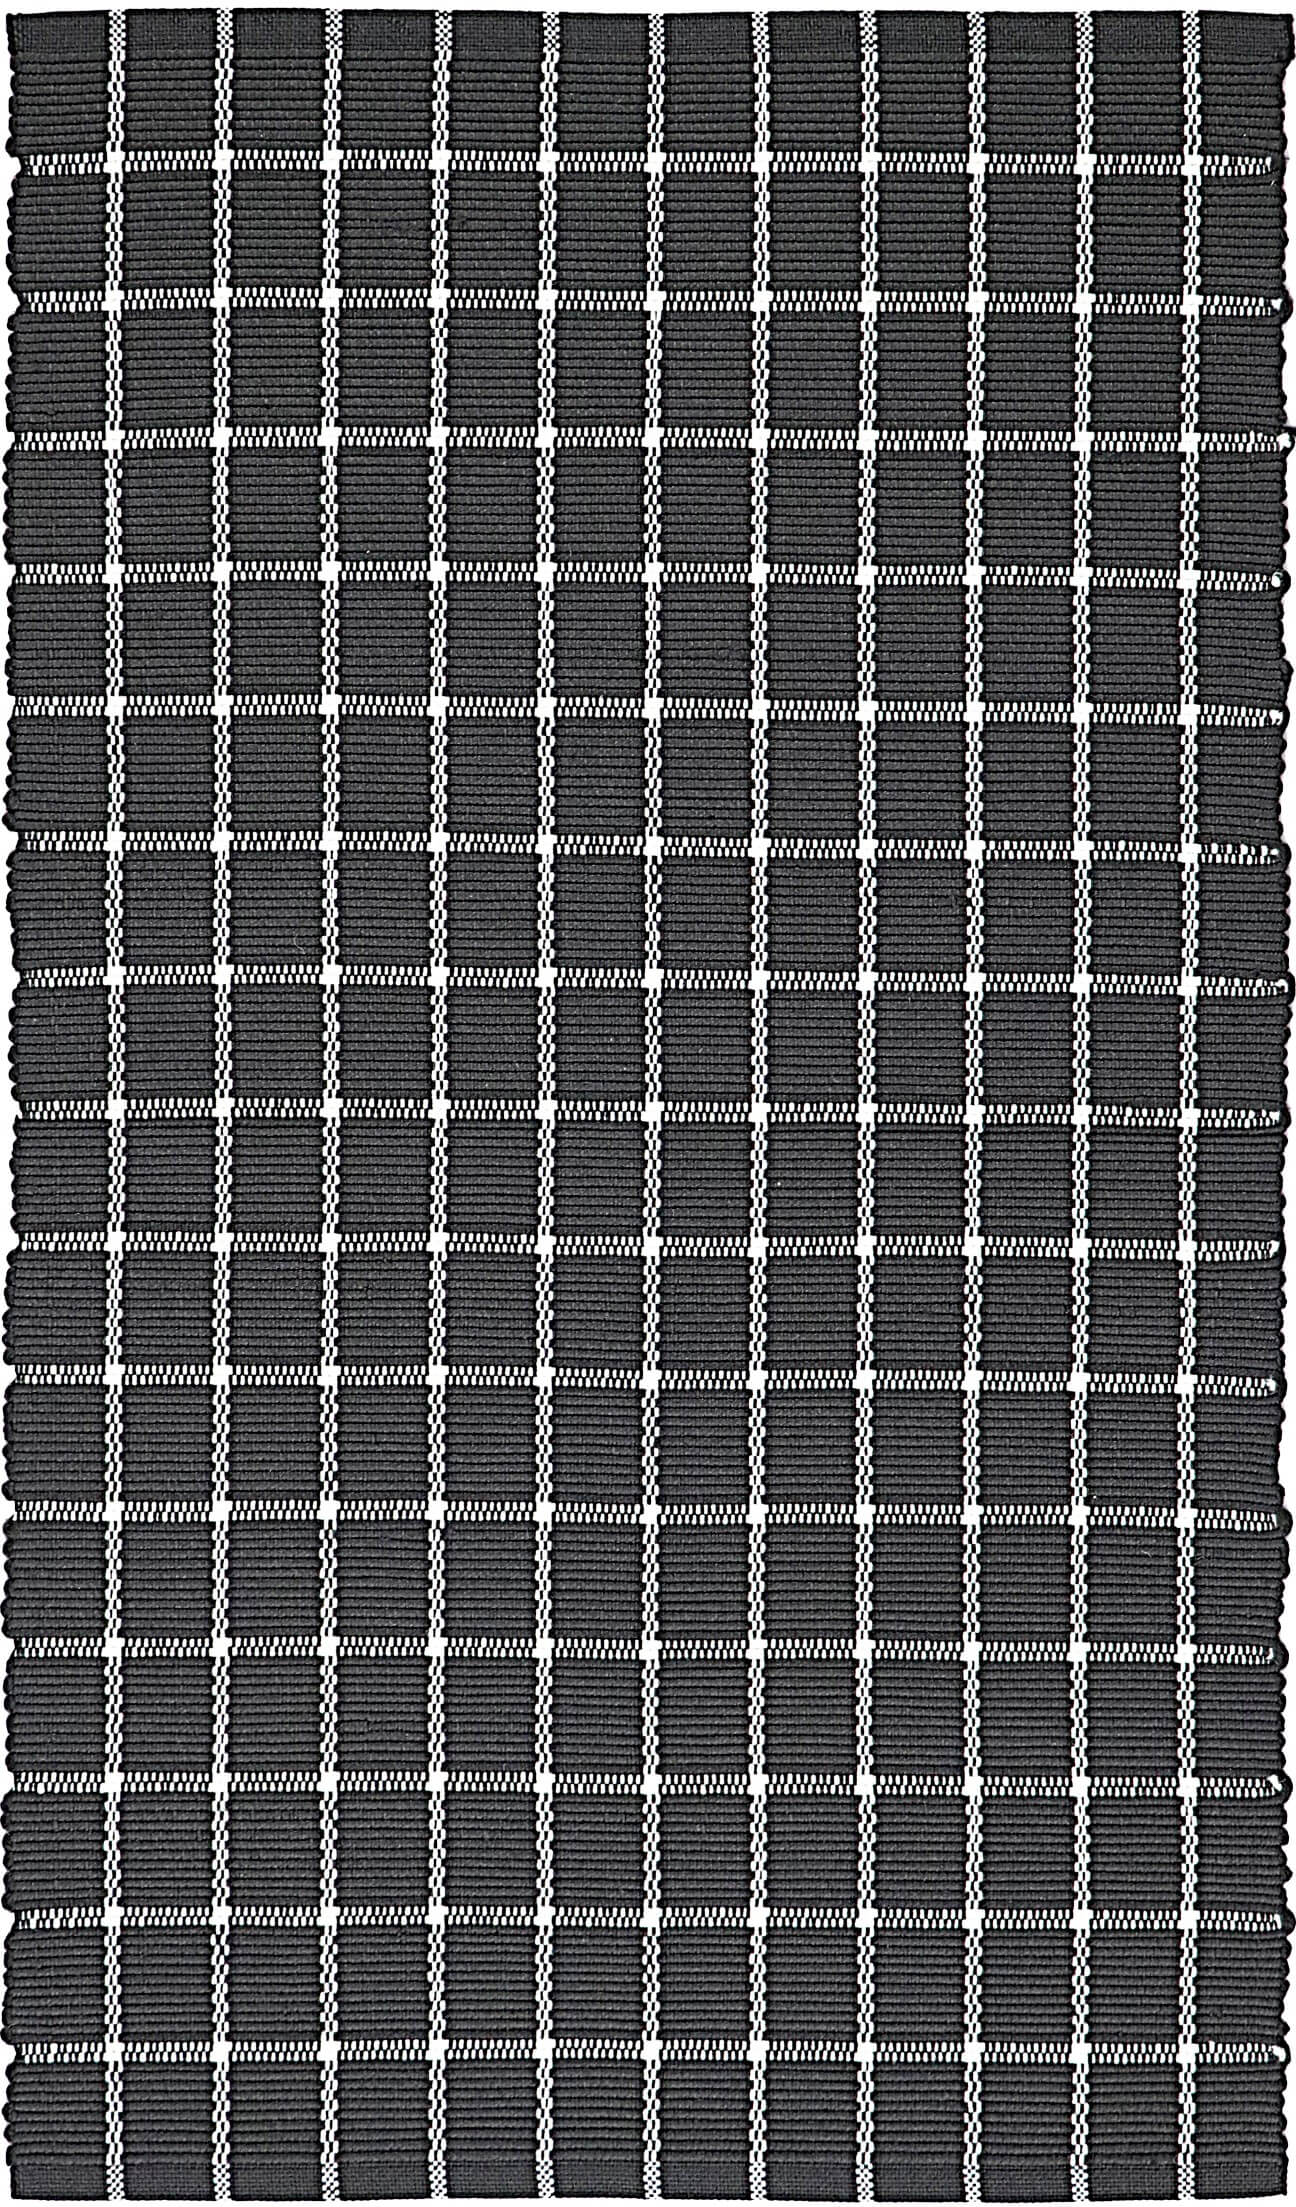 Great Plains Multi-Purpose Utility Mat Collection, Checkered Fashion